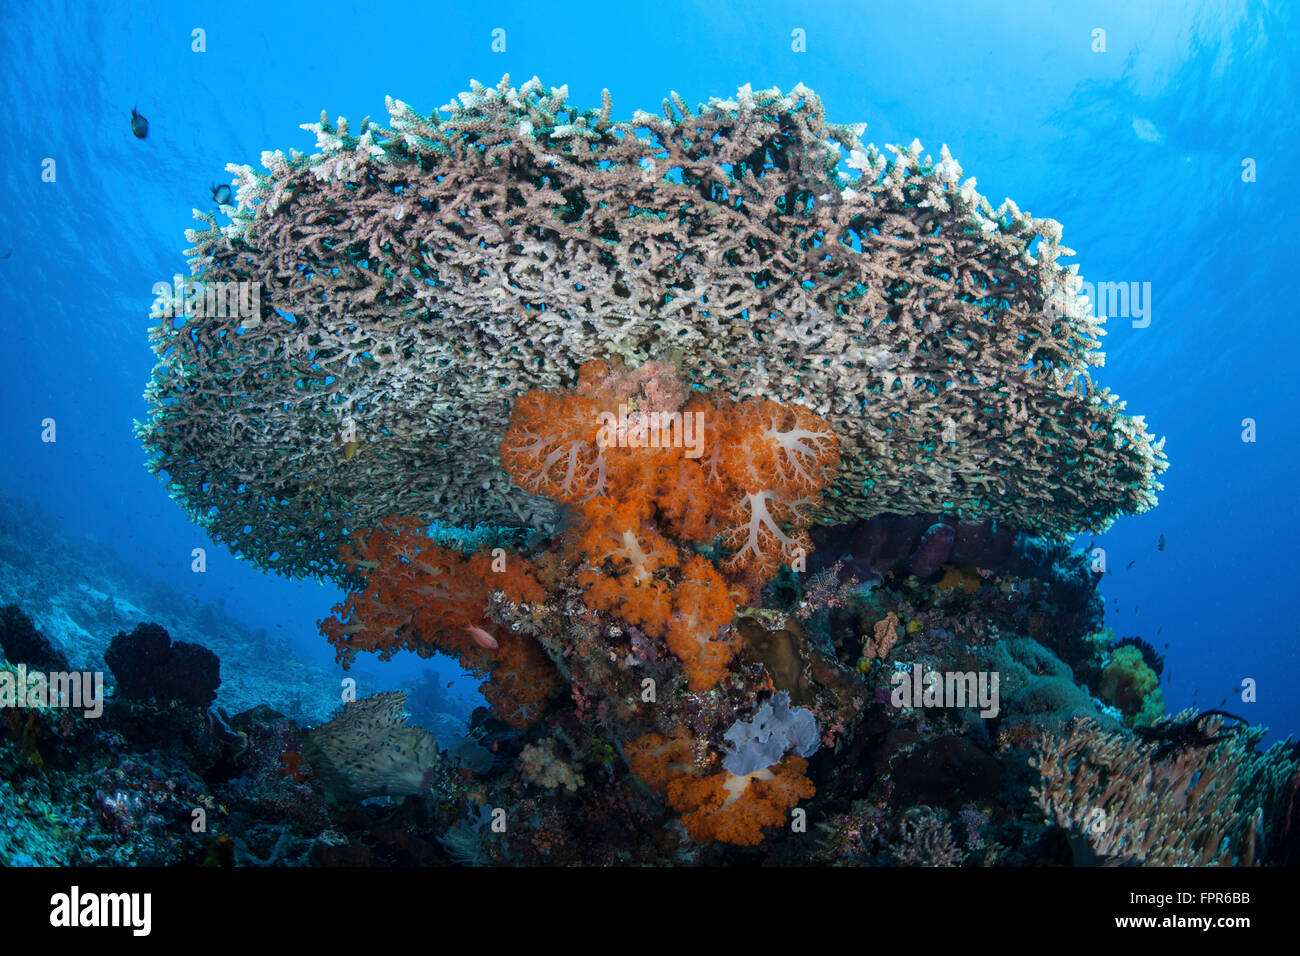 Soft corals grow beneath a large table coral in Komodo National Park ...